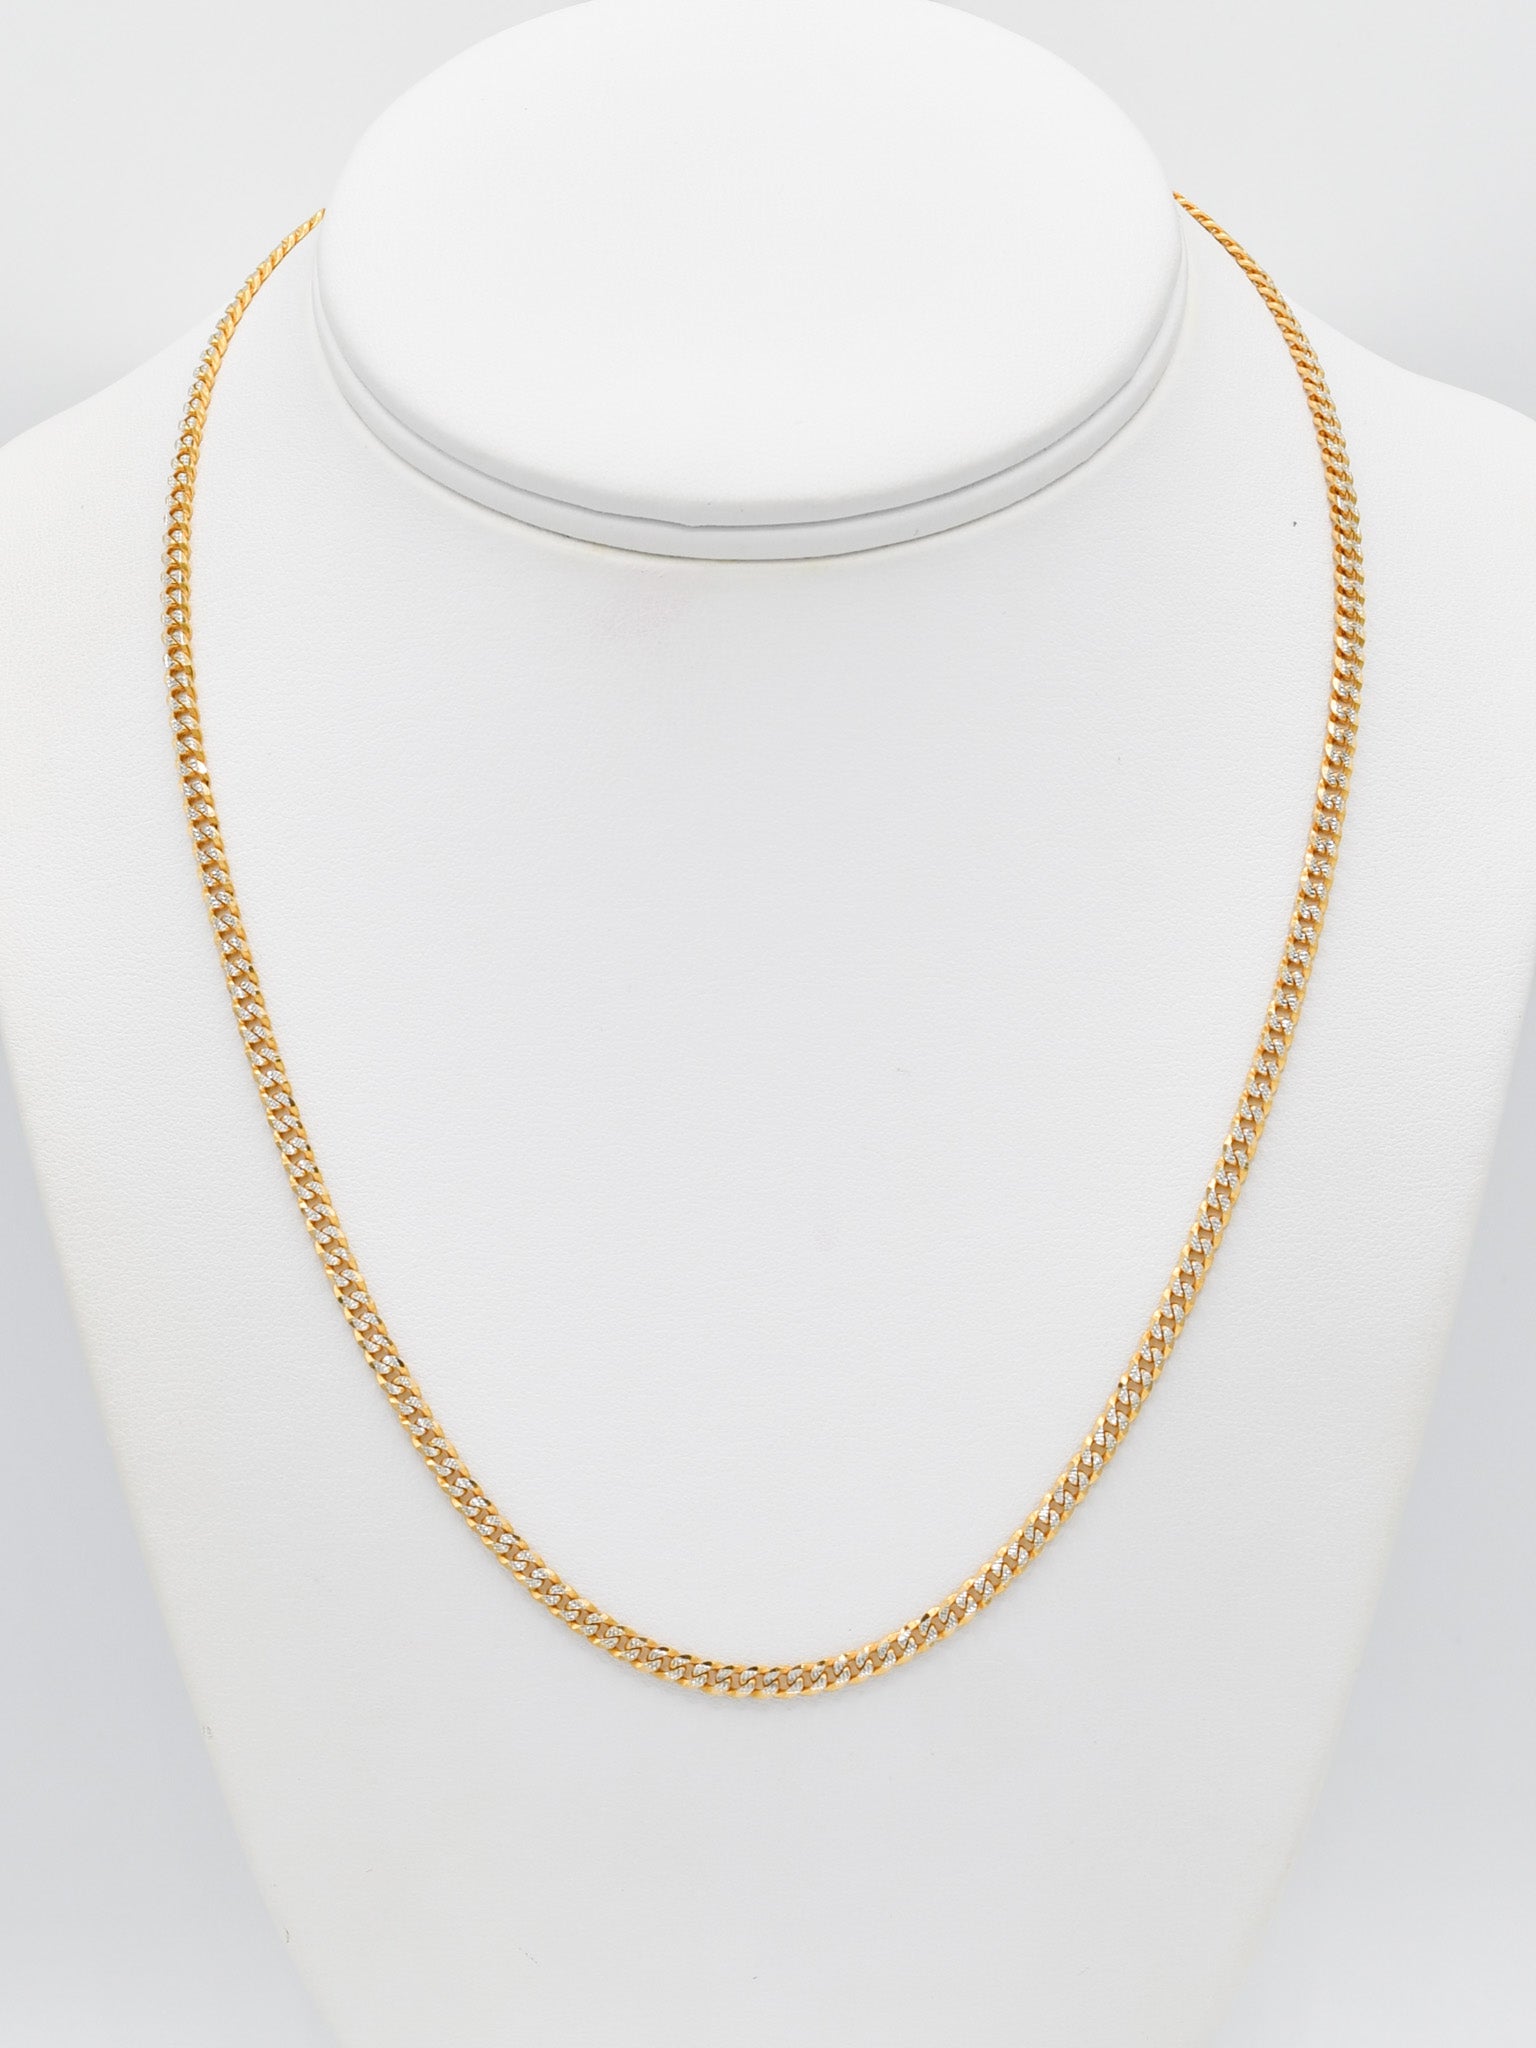 22ct Gold Two Tone Curb Chain - Roop Darshan